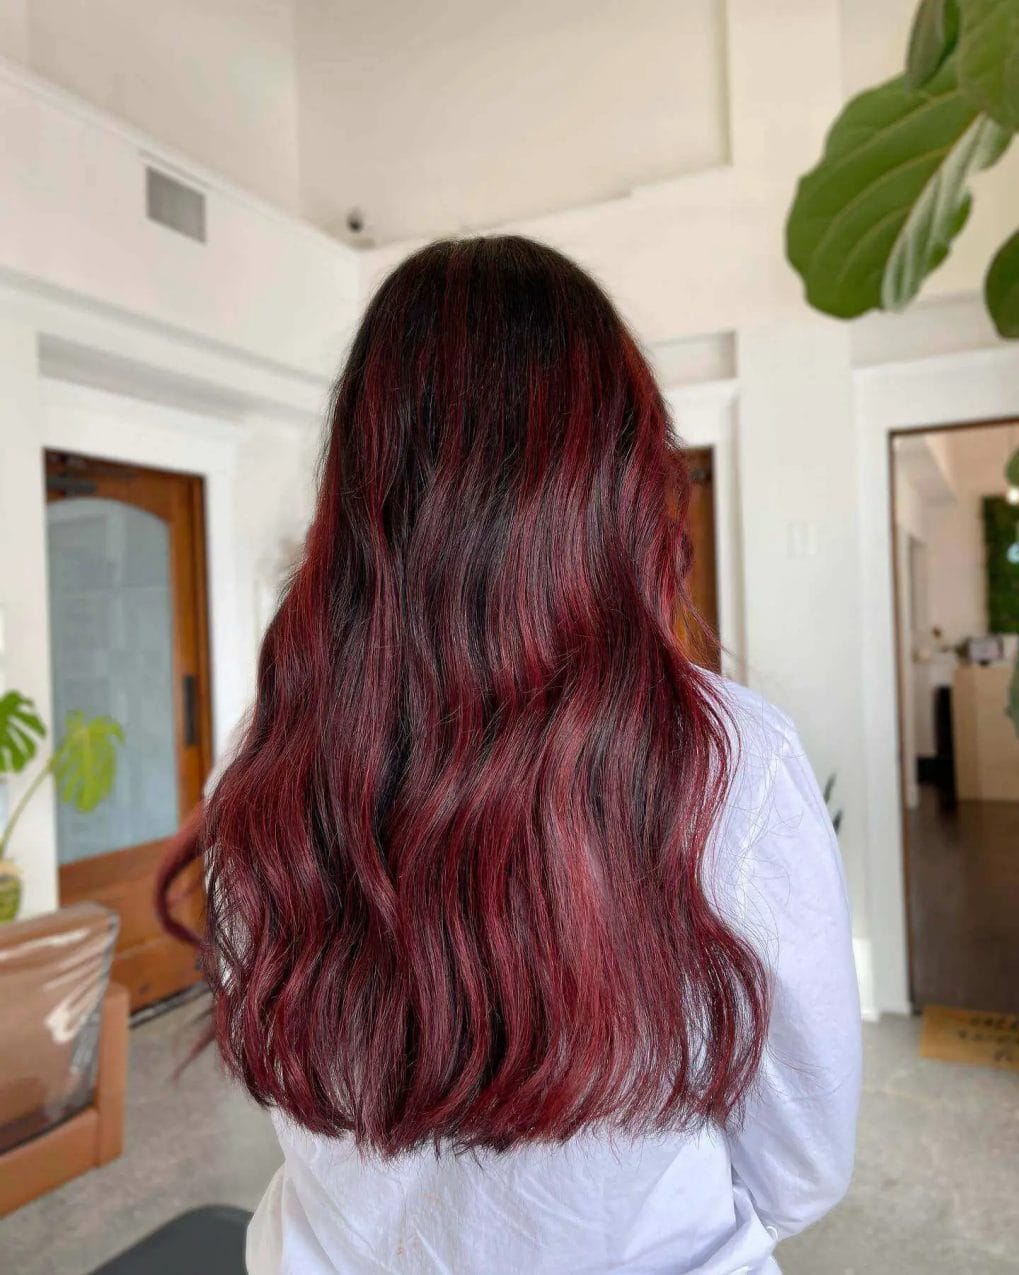 Deep brunette to burgundy red balayage, long flowing layers.